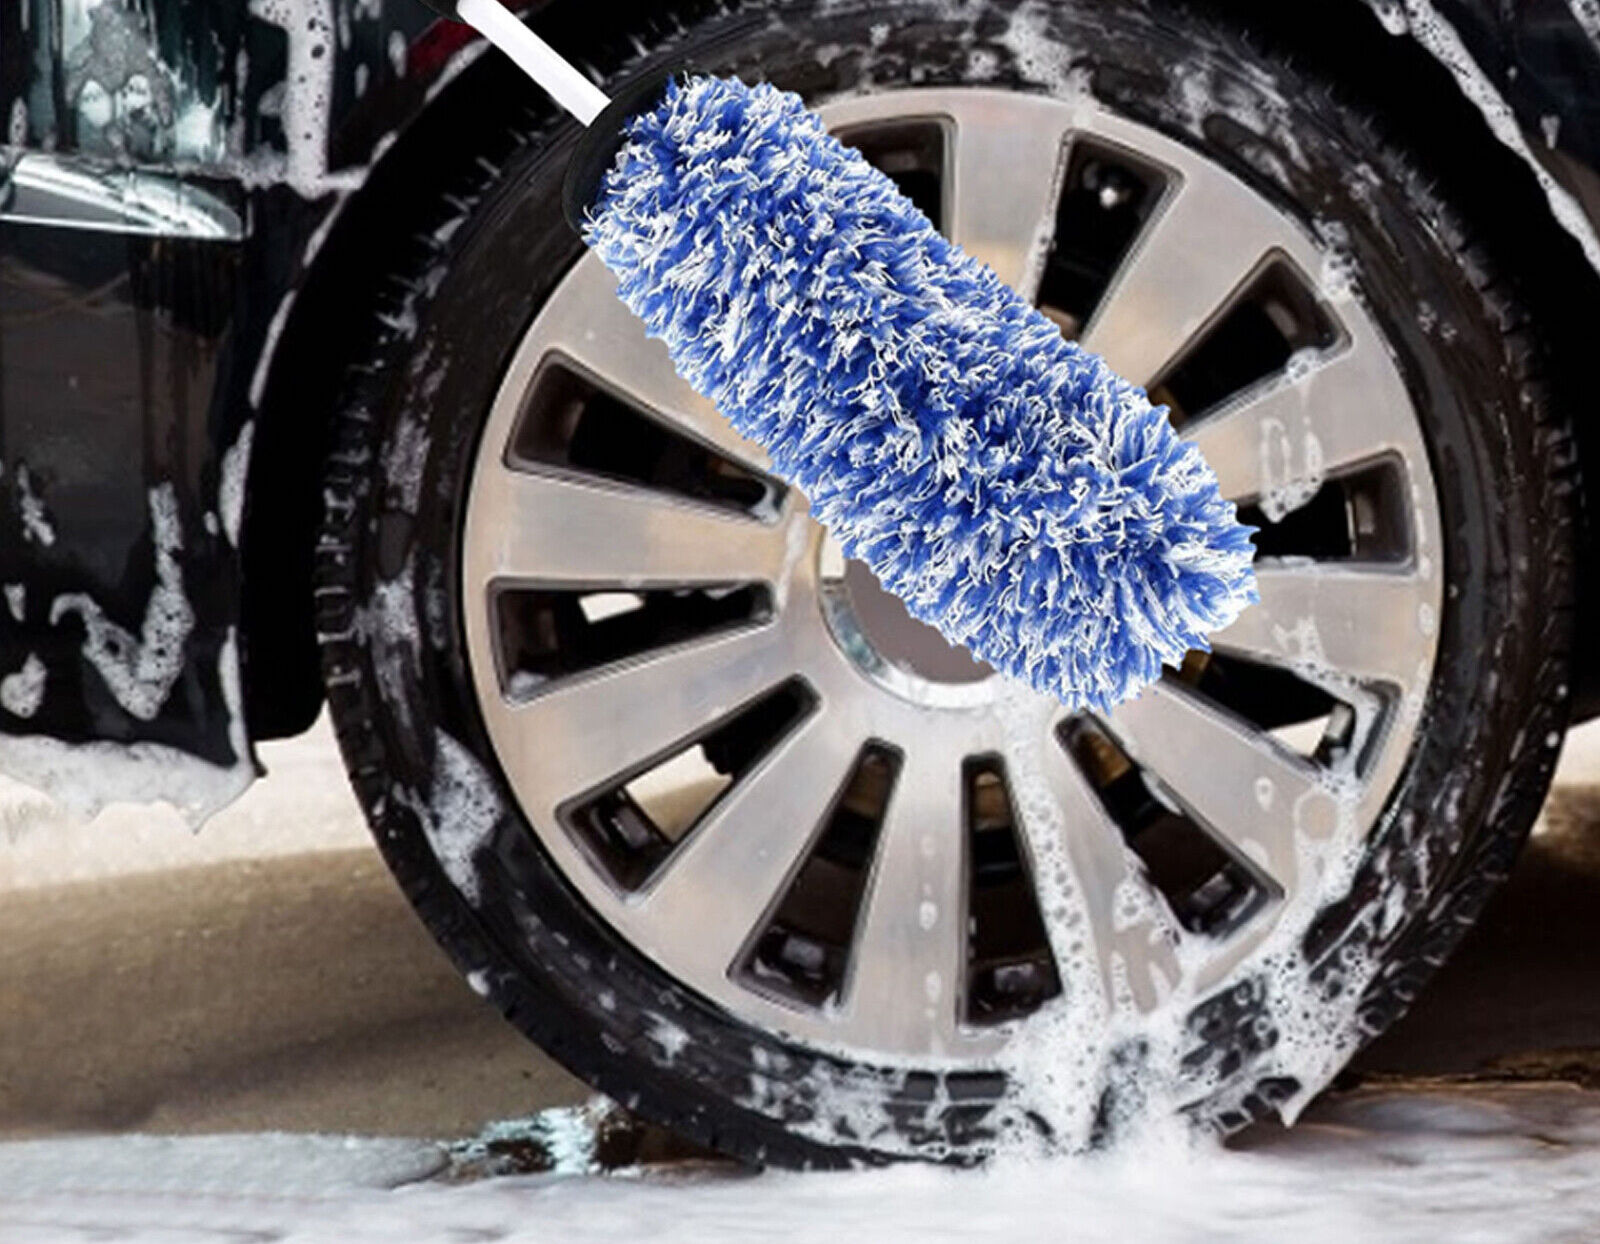 Brake Dust Professional Wheel Cleaner: Clean your wheels with no